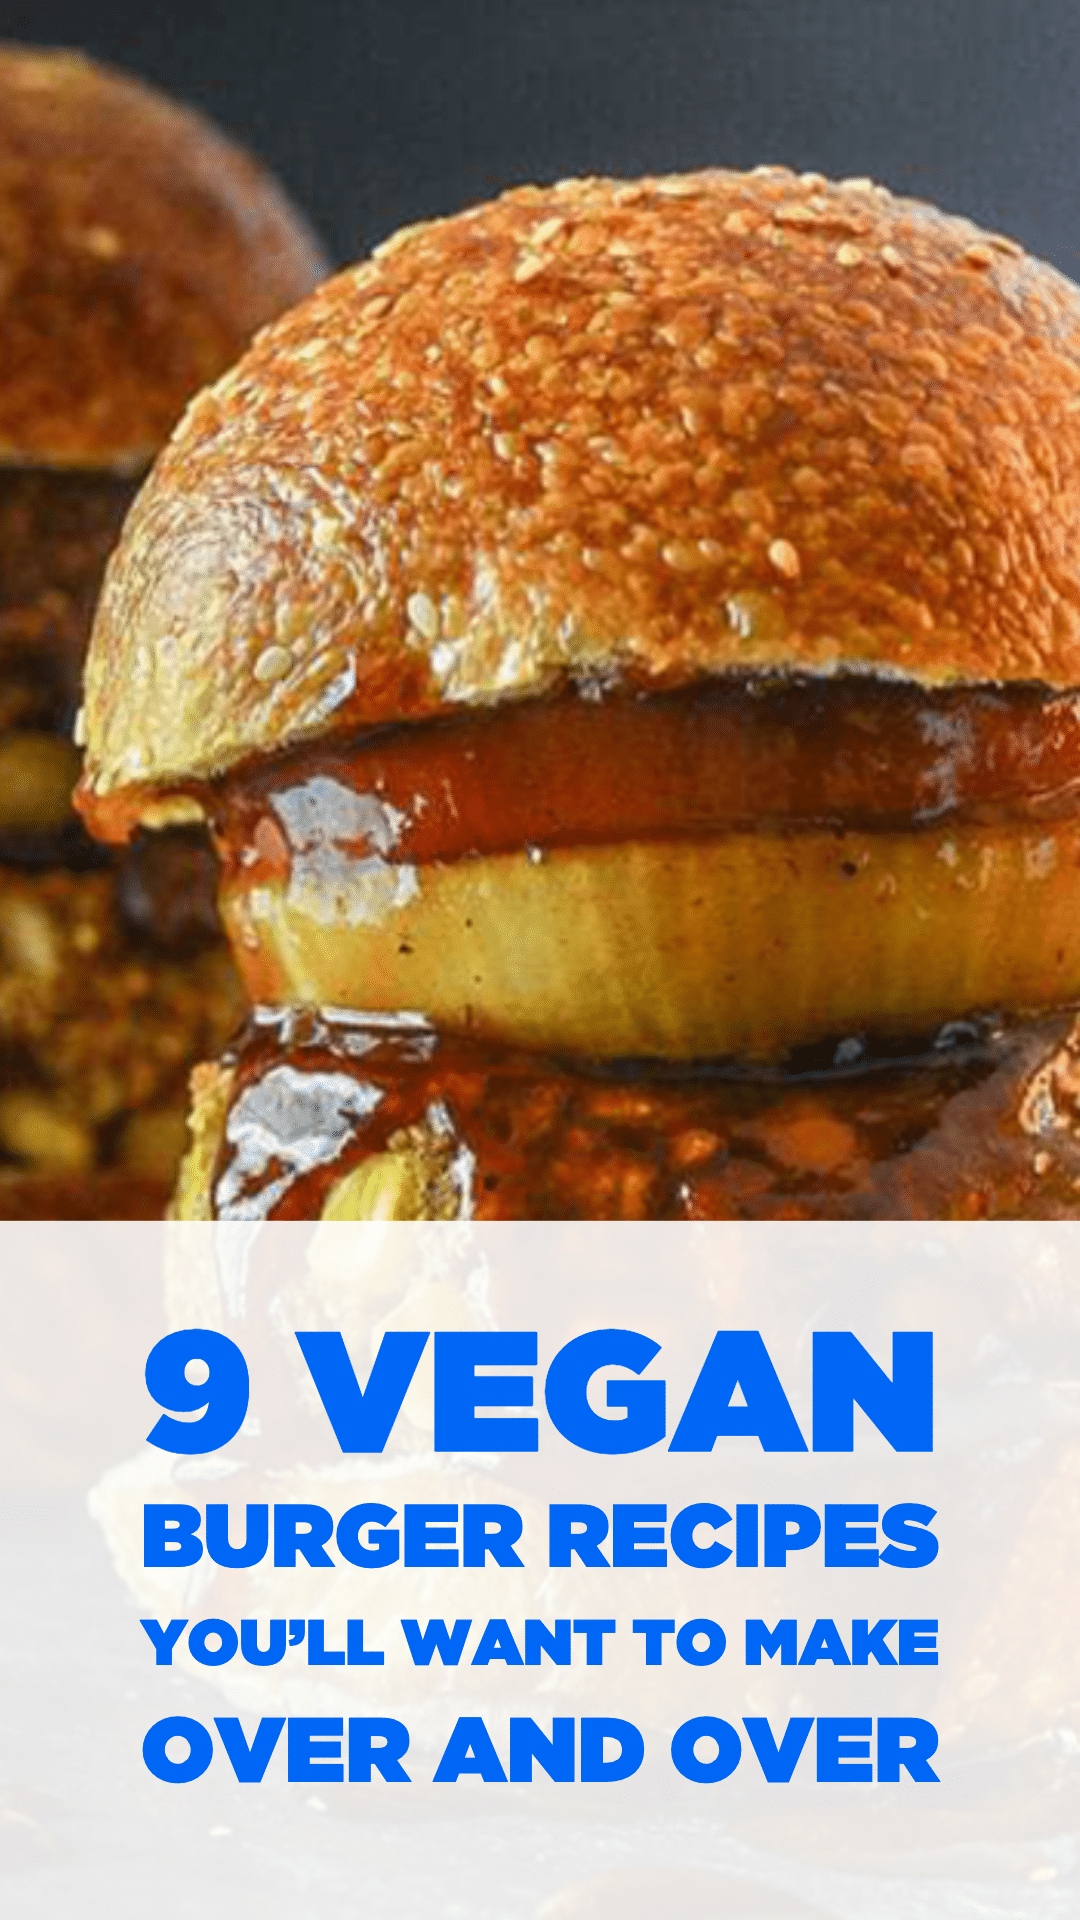 9 Vegan Burger Recipes You’ll Want to Make Over and Over